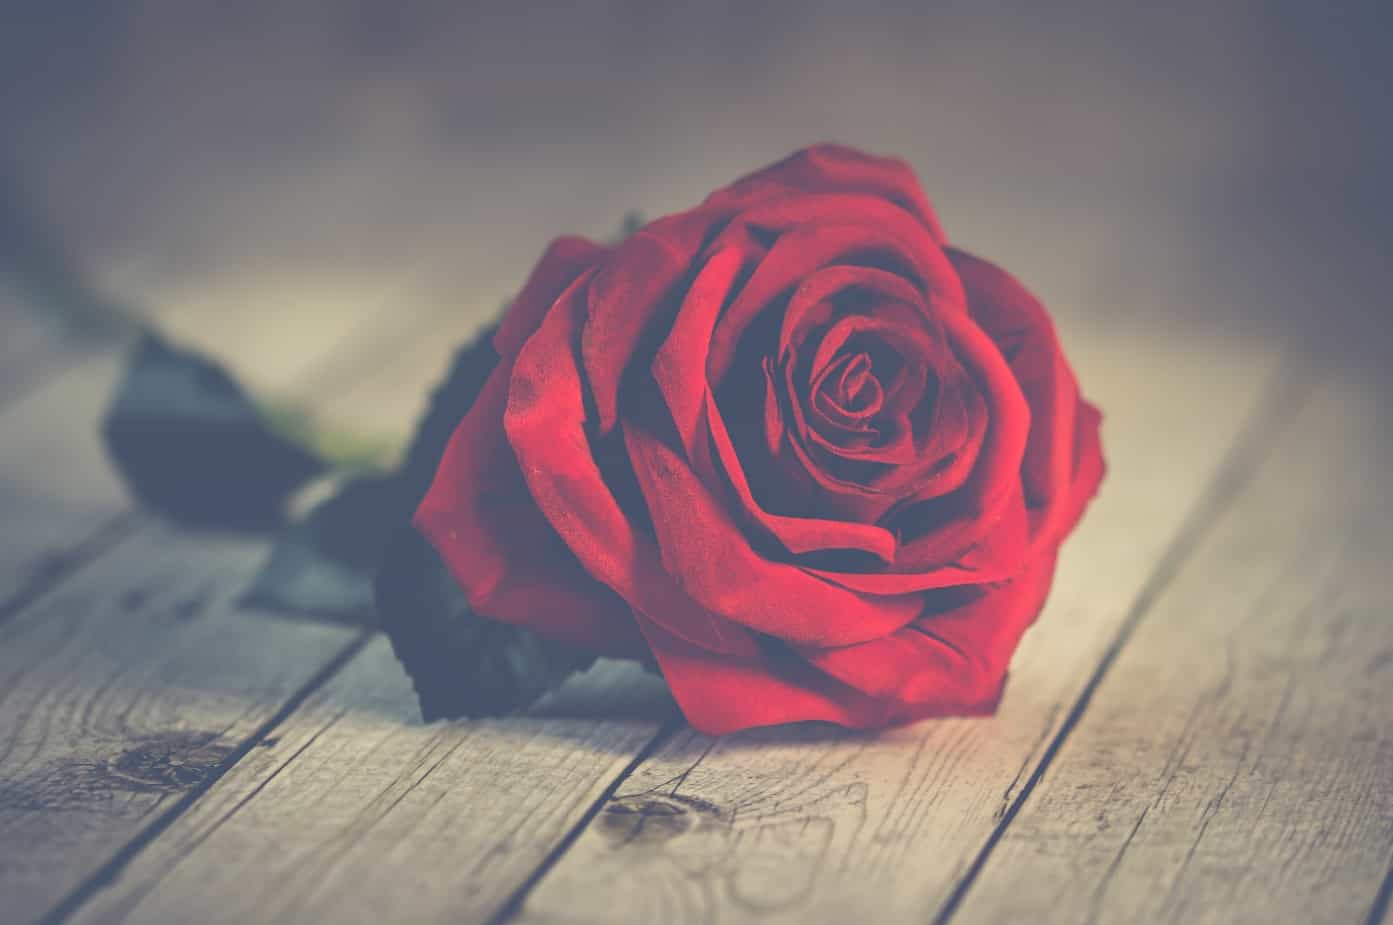 Muted image of a single red rose on wood: Valentine's Day Divorce.